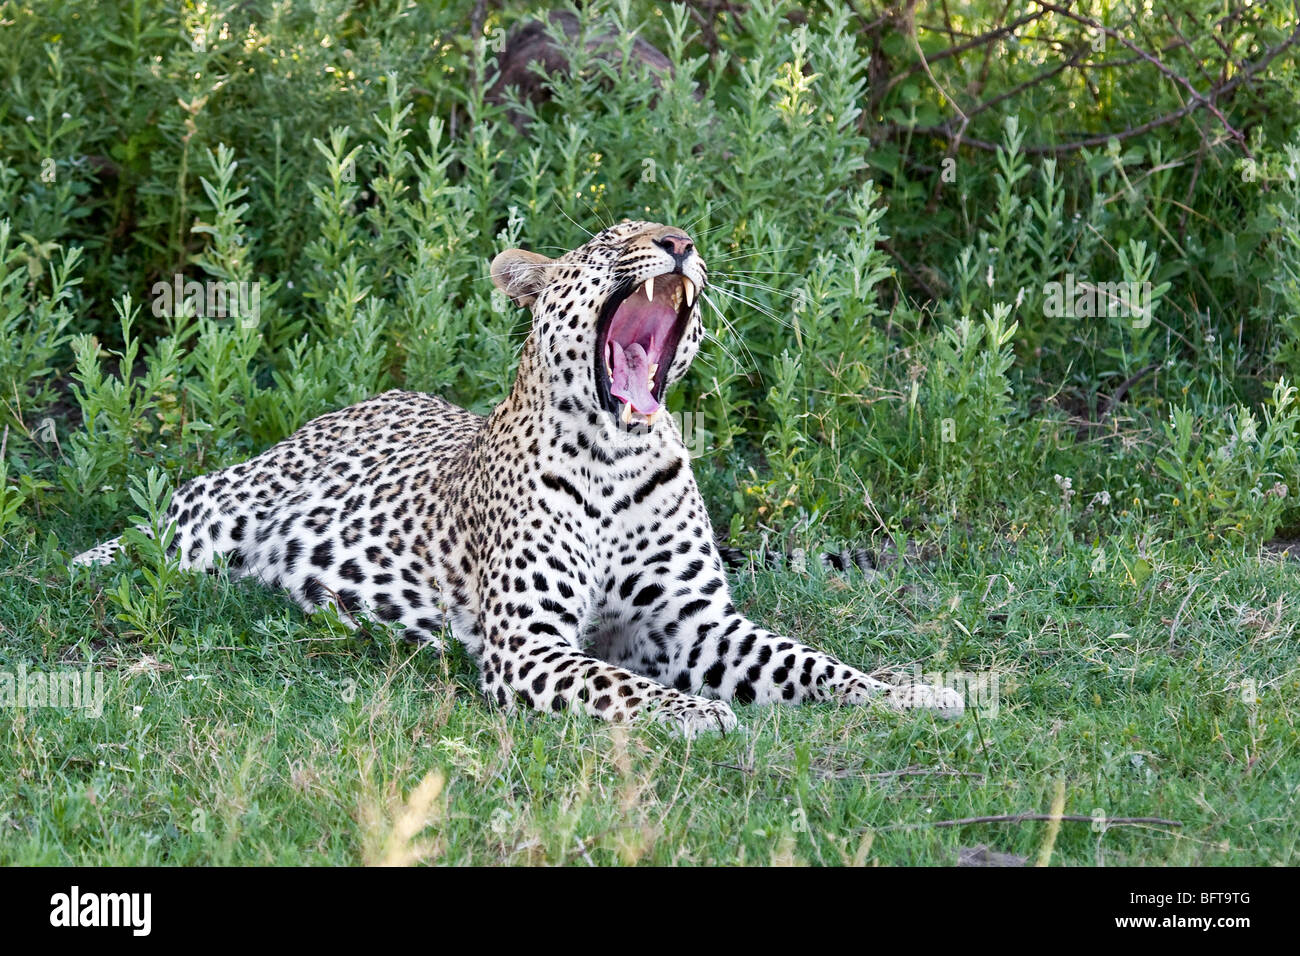 Leopard Yawning showing its wide open mouth with teeth showing Stock Photo